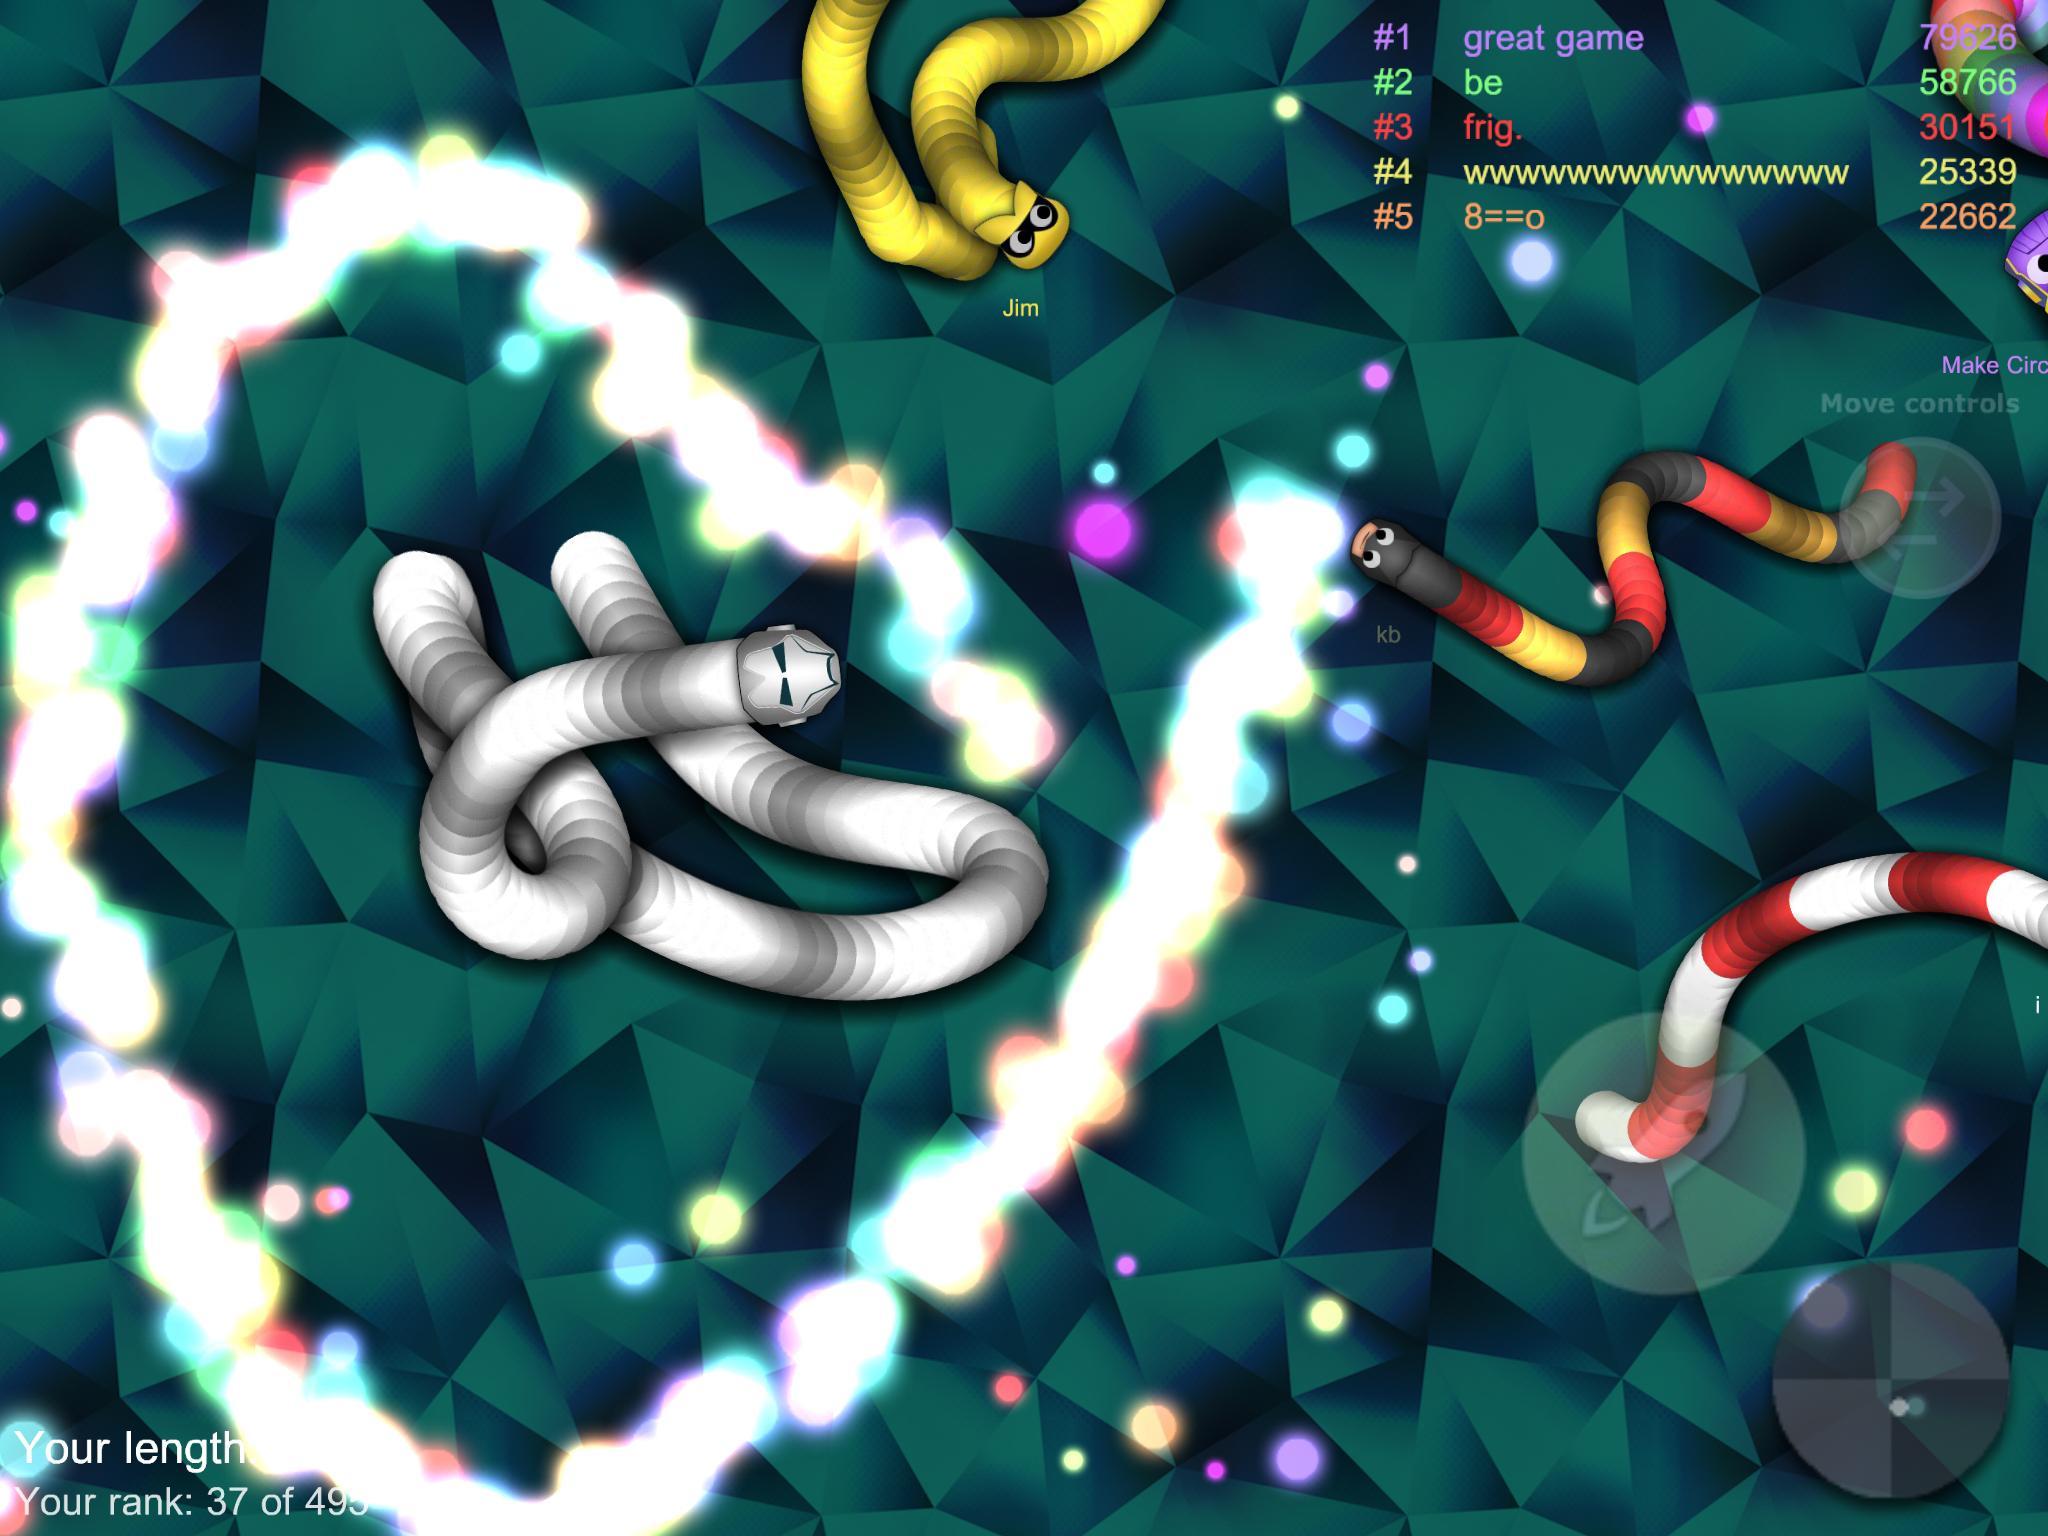 Worms battle. Worms Zone - Slither Snake. Worms Zone hungry Snake. Worms Zone worms. Игра червячки Slither играть.